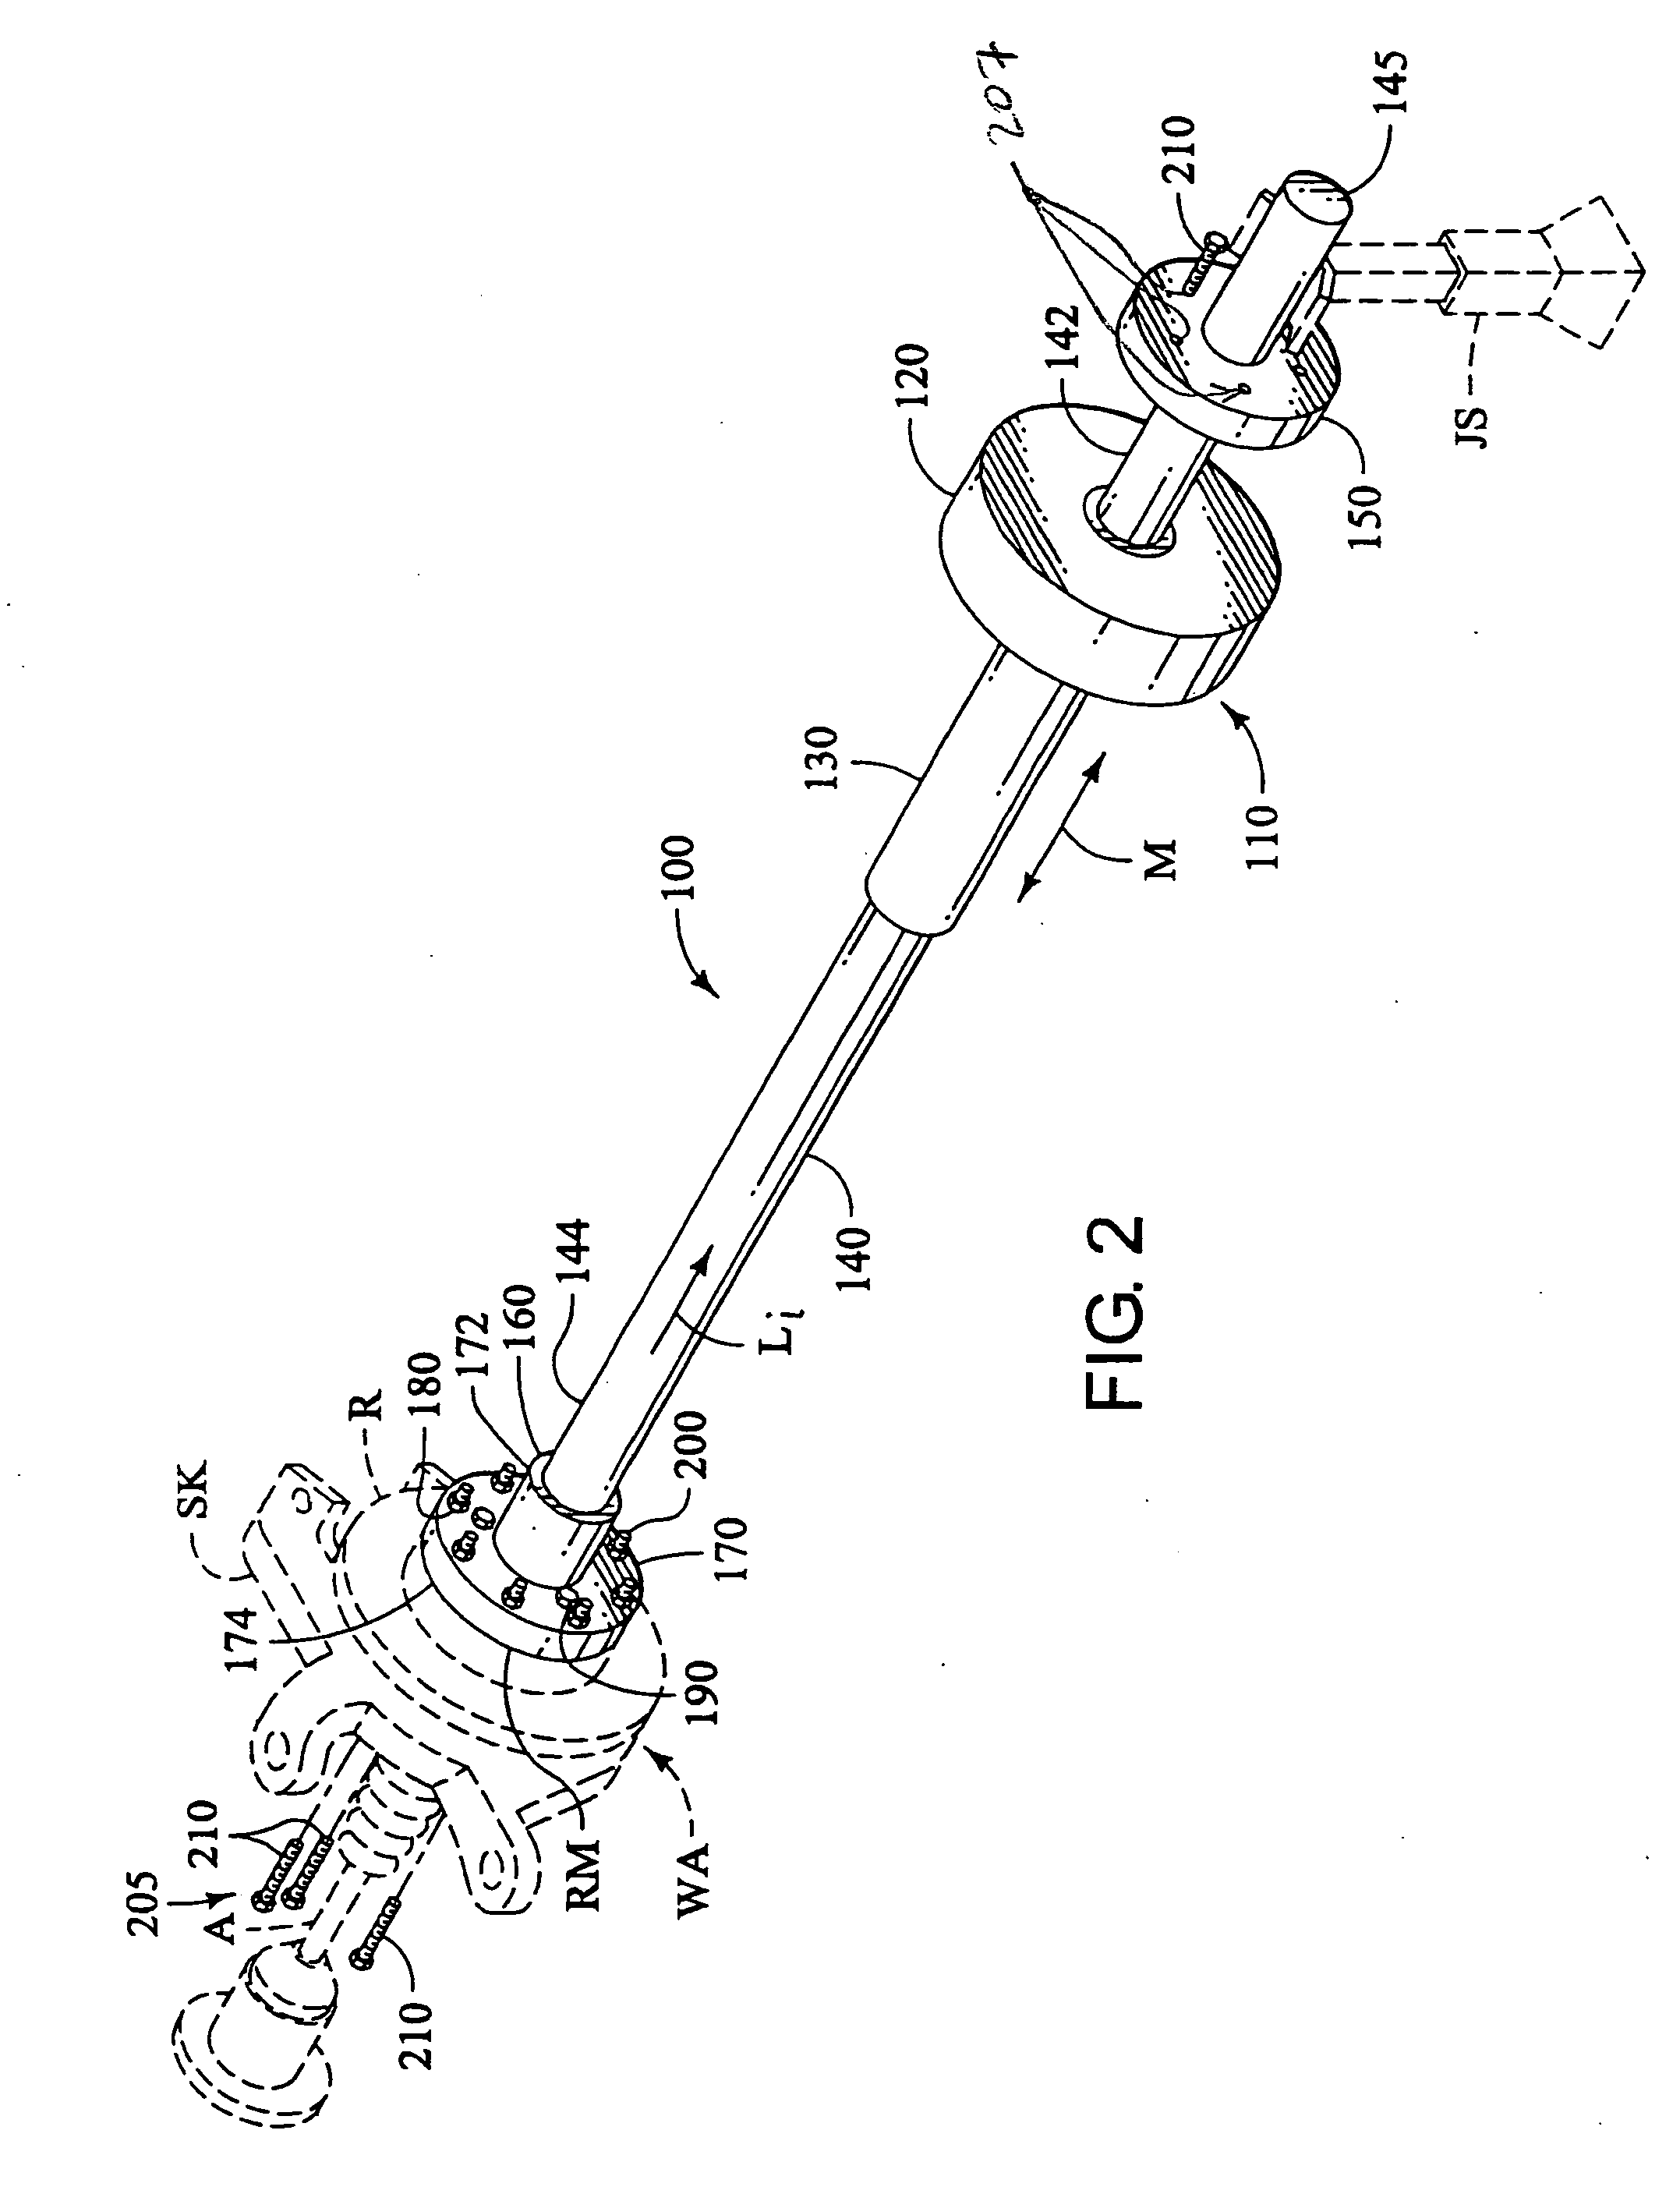 Automotive wheel assembly removal apparatus